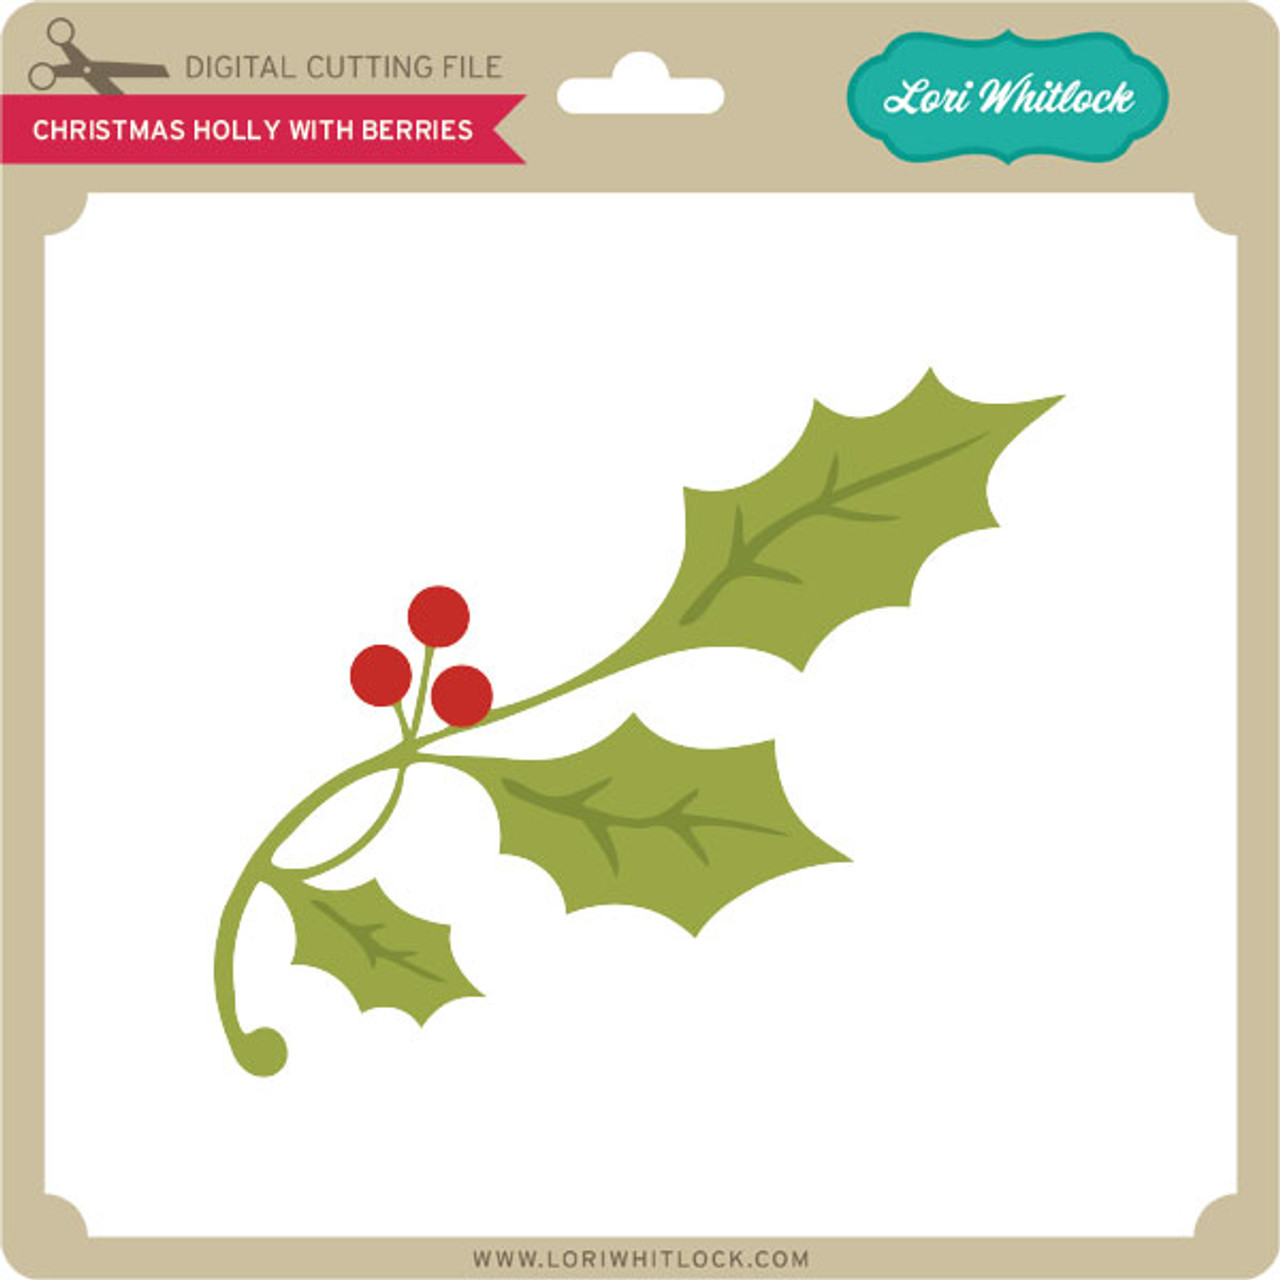 Christmas Holly with Berries - Lori Whitlock's SVG Shop